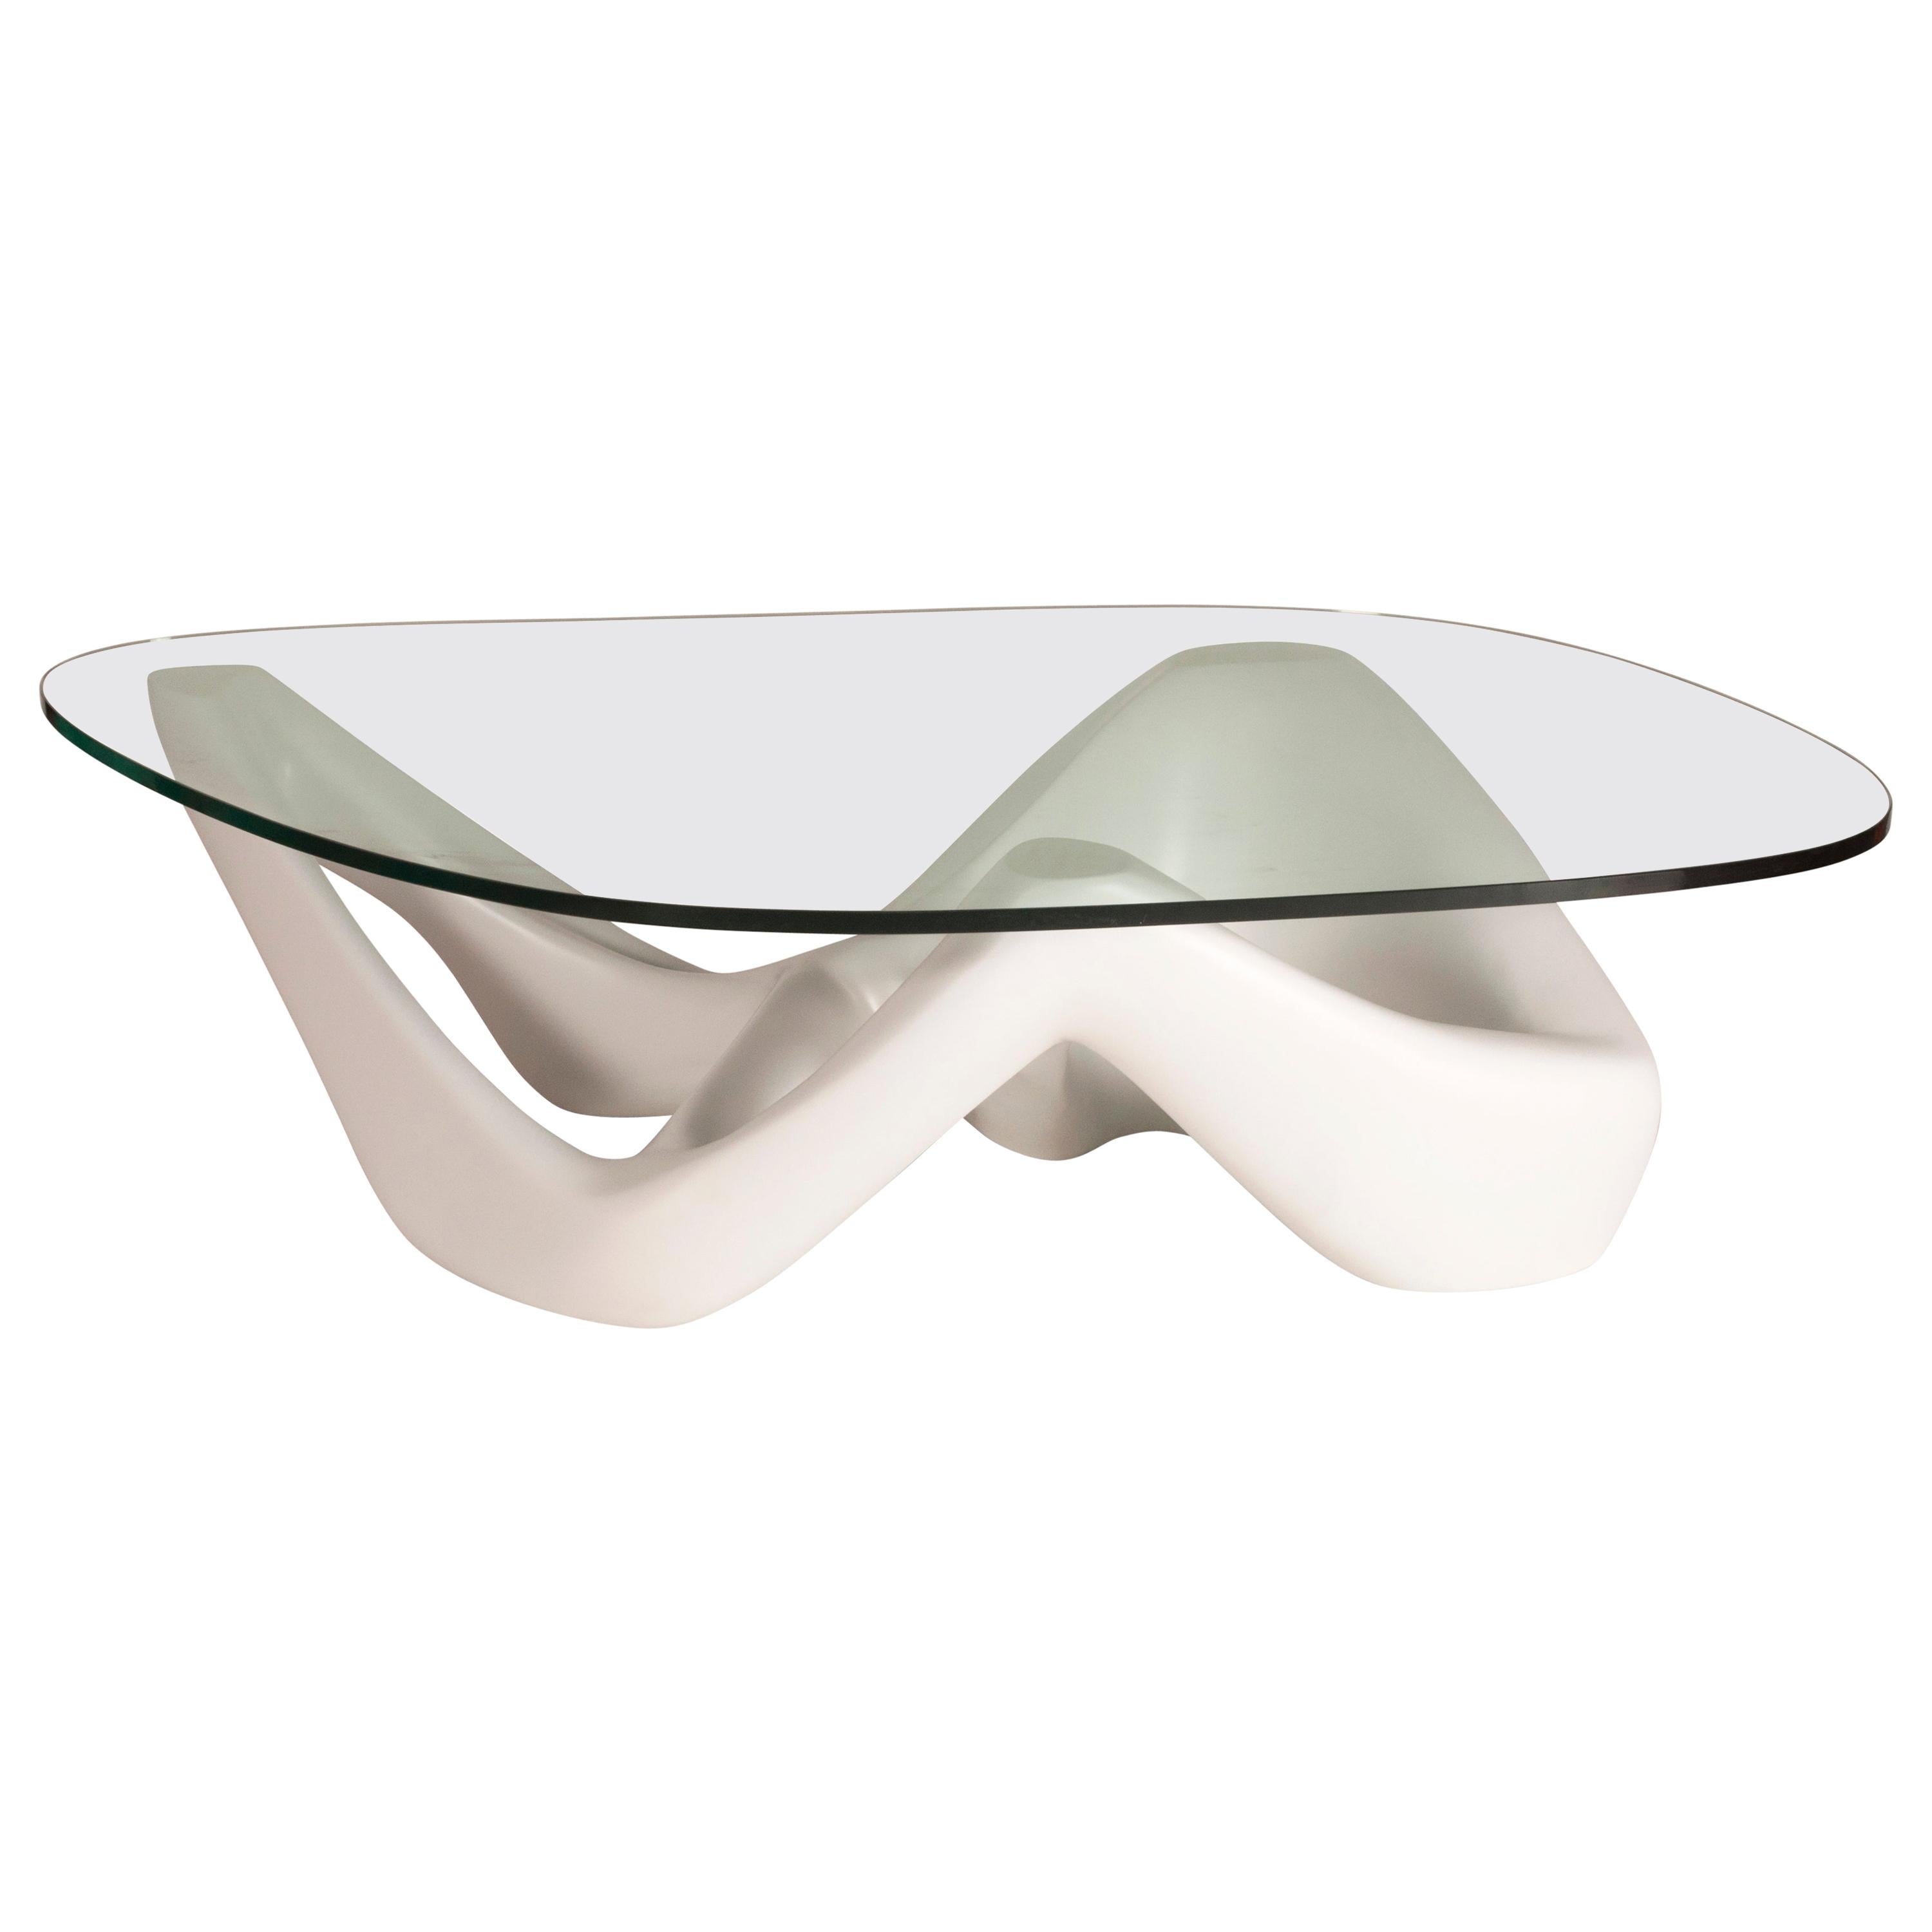 Amorph Net Coffee Table White Lacquered with Organic Shaped Tempered Glass For Sale